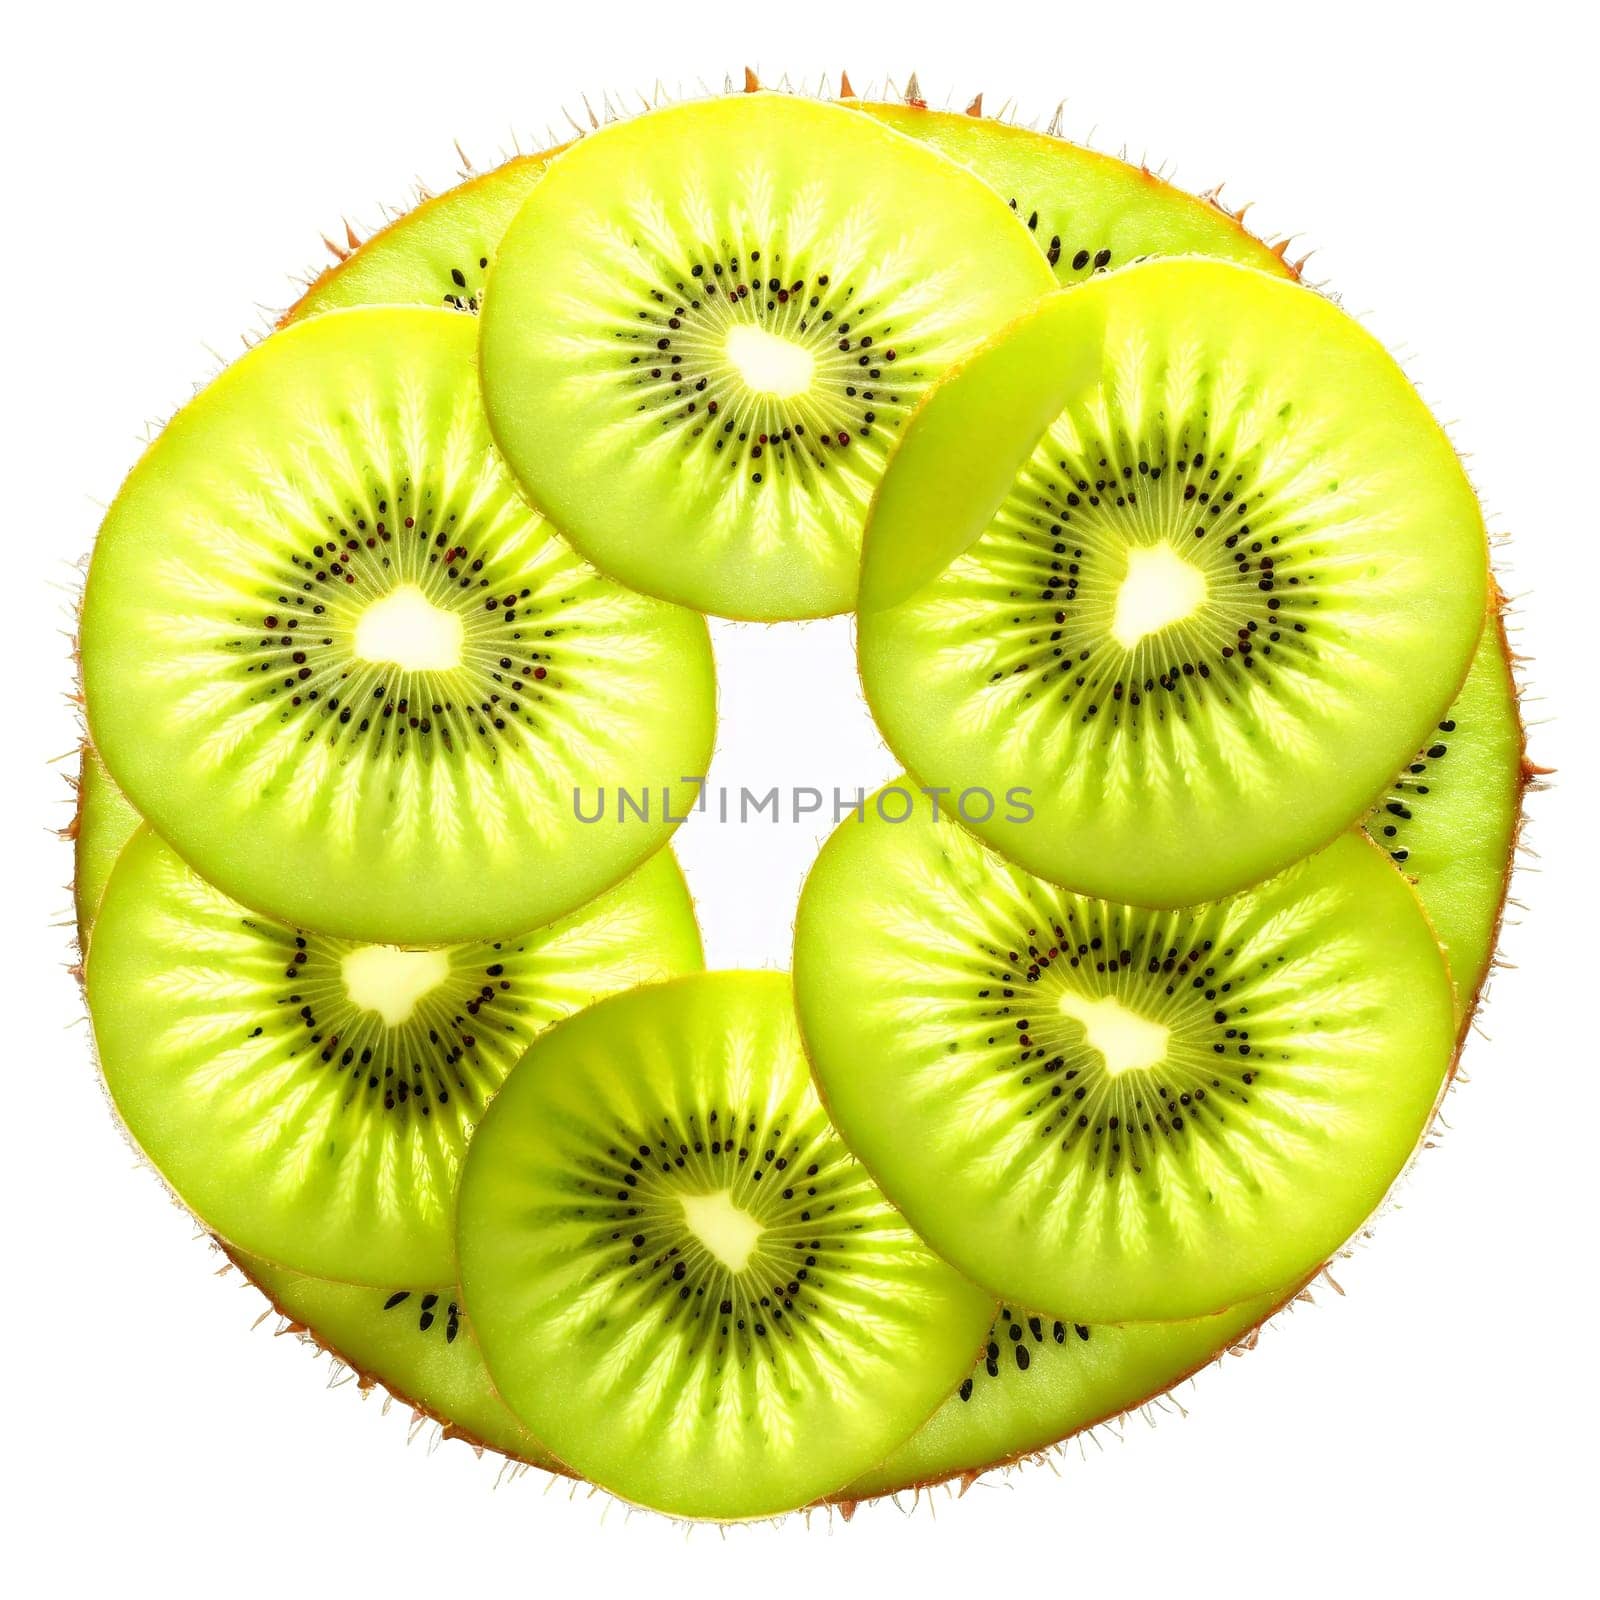 Kiwi Starburst Shape Vibrant green kiwi slices arranged in a starburst pattern with seeds floating. Food isolated on transparent background.